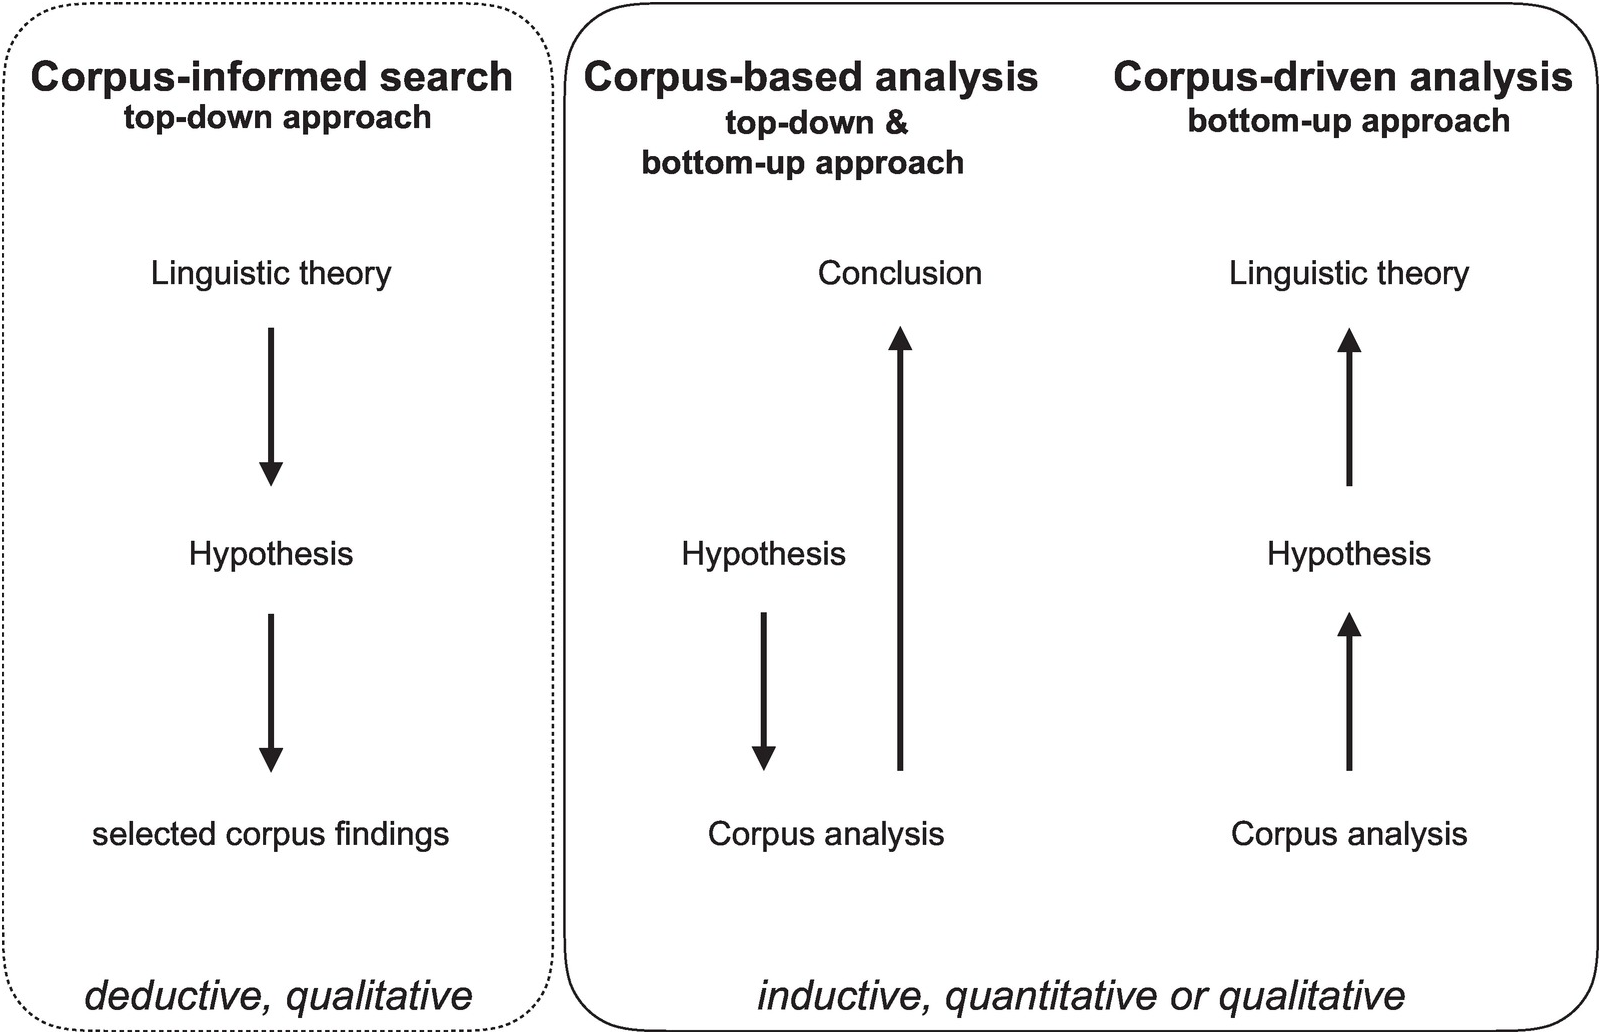 CORPUS-BASED LEXICOGRAPHIC RESOURCES FOR TRANSLATORS: AN OVERVIEW